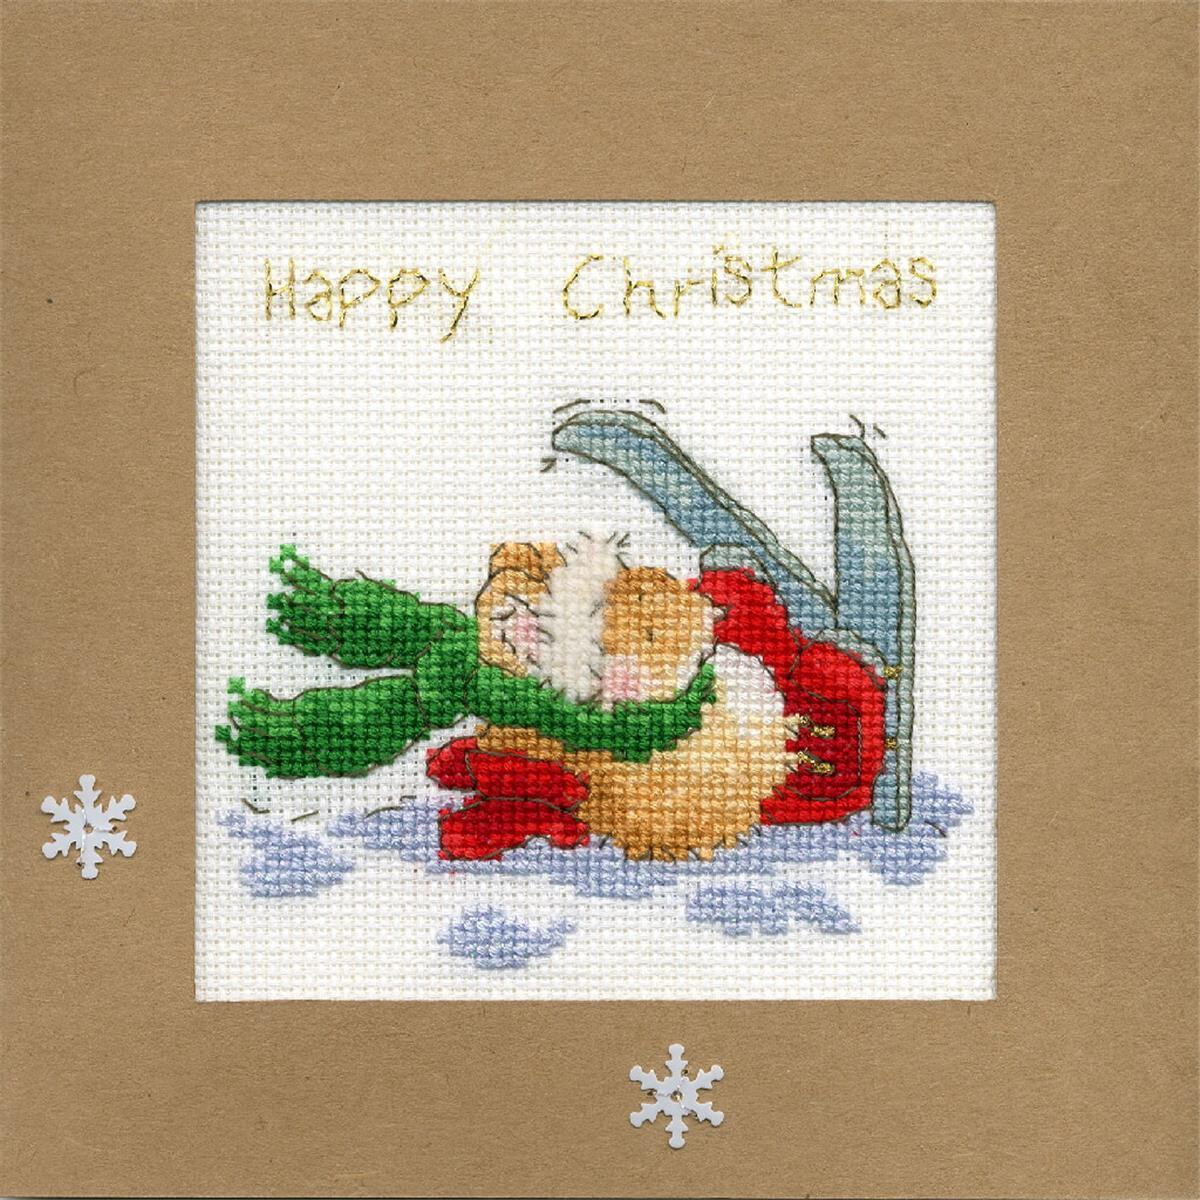 An embroidered pack picture of a cat in a Santa costume...